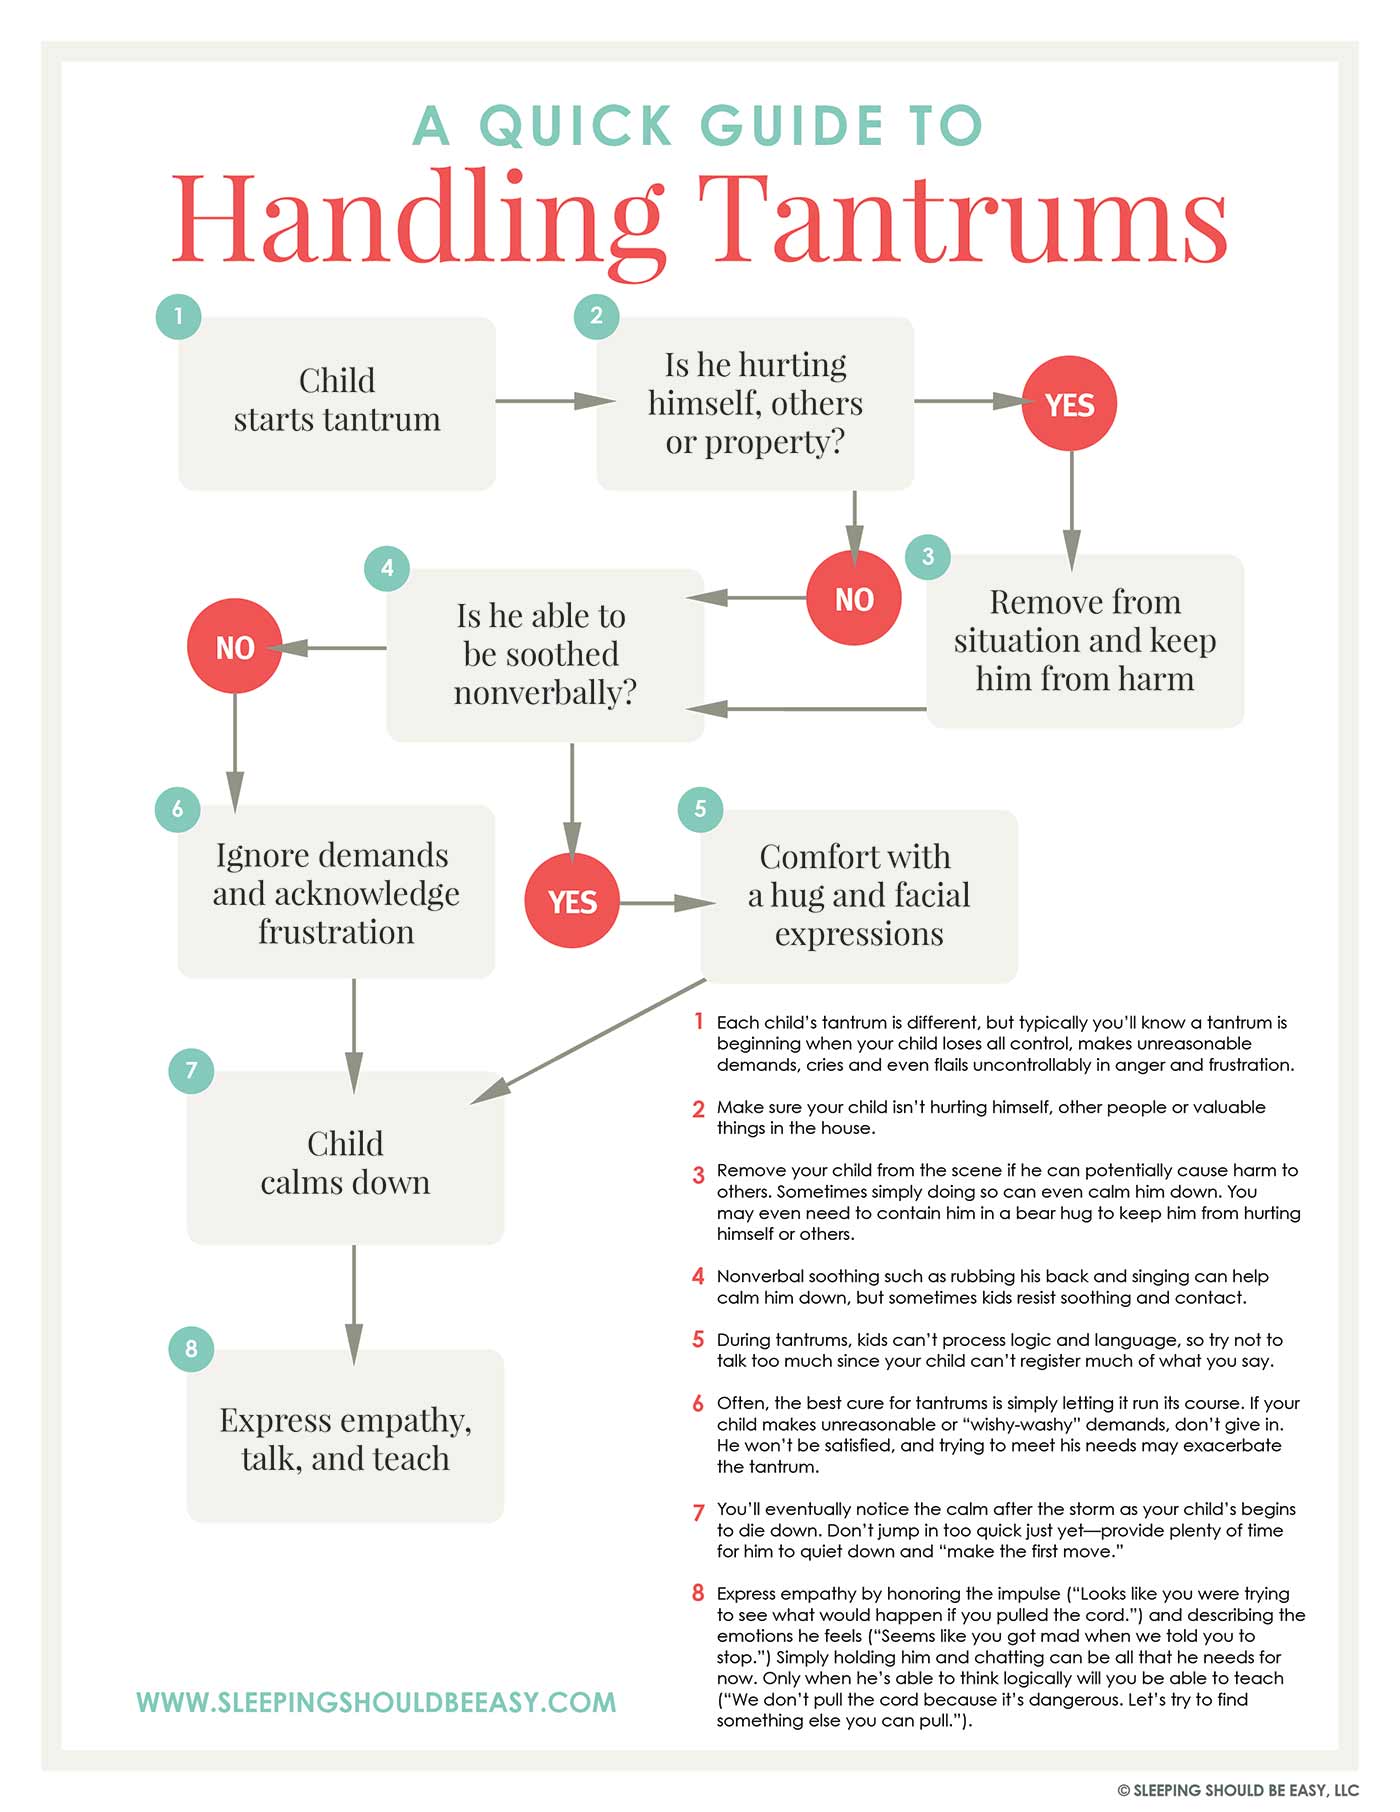 A Quick Guide to Handling Tantrums